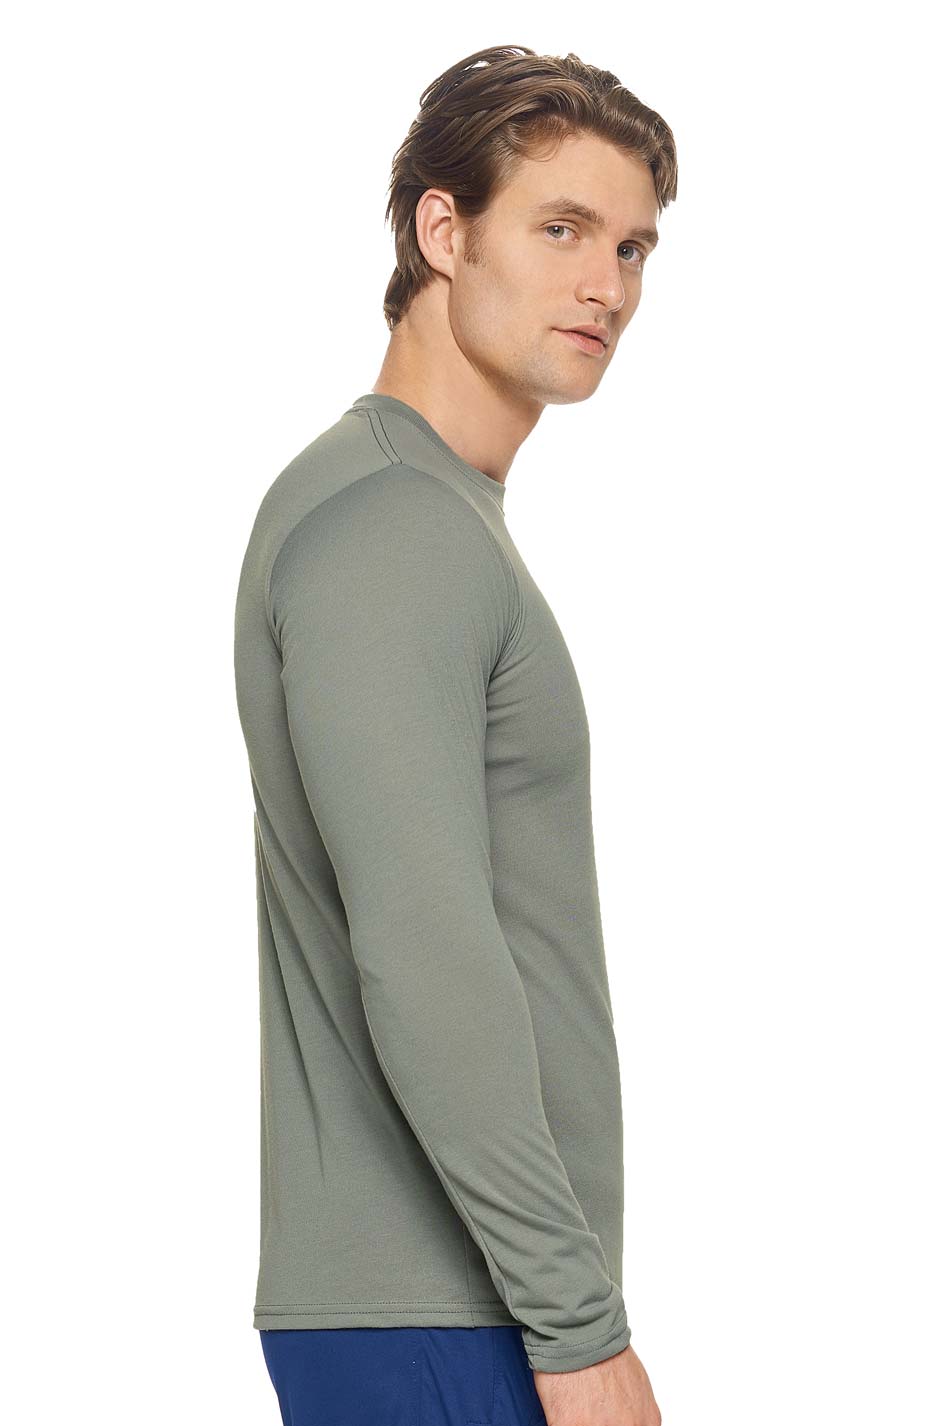 Expert Brand Wholesale Men's In the Field Outdoors Long Sleeve Tee Made in USA PT808 Army Gray iamge 2#army-gray